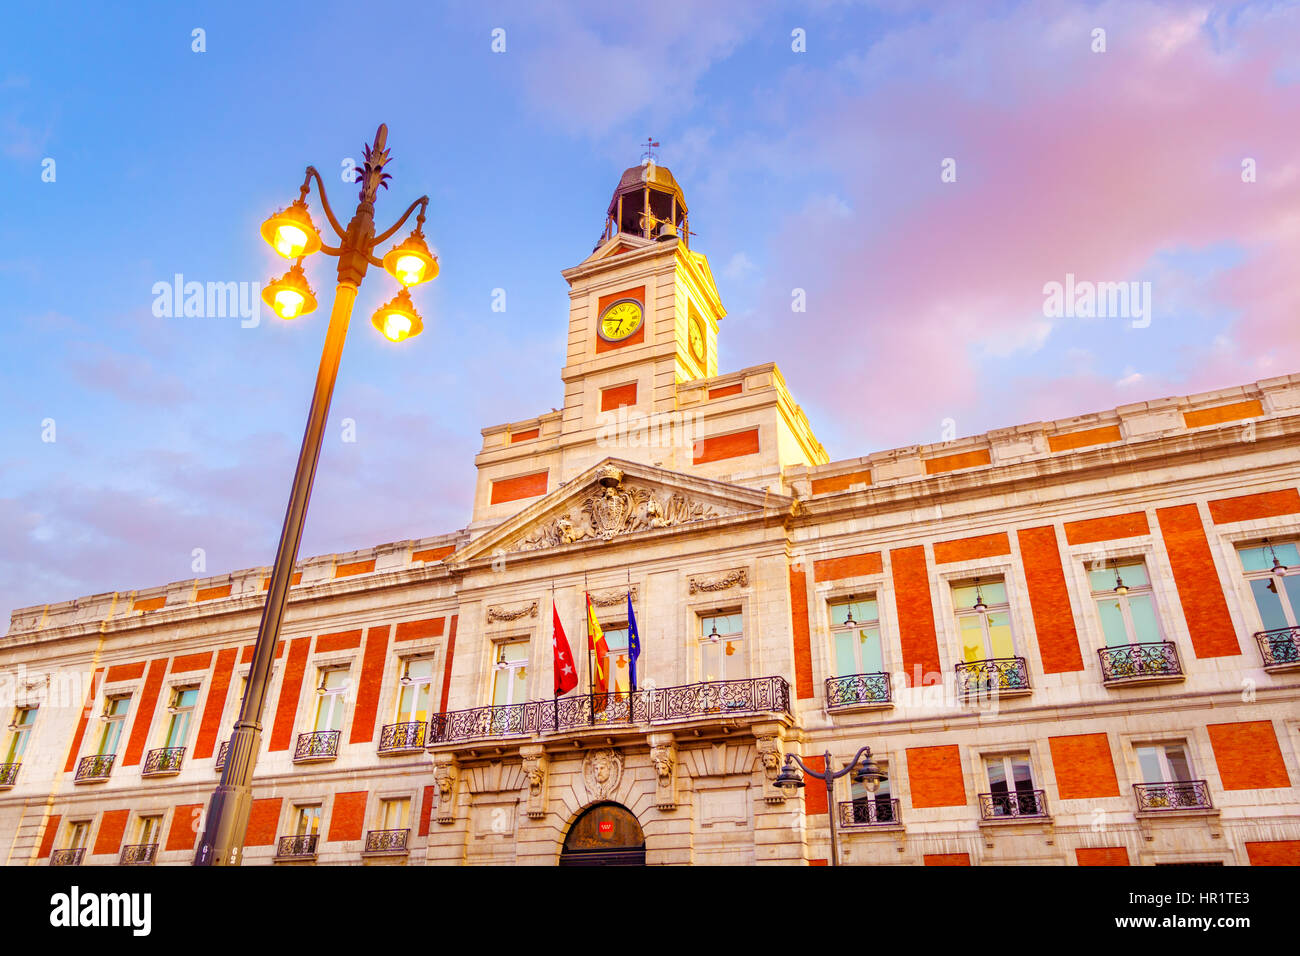 The Puerta del Sol square is the main public square in the city of Madrid, Spain. In the middle of the square is located the office of the President o Stock Photo